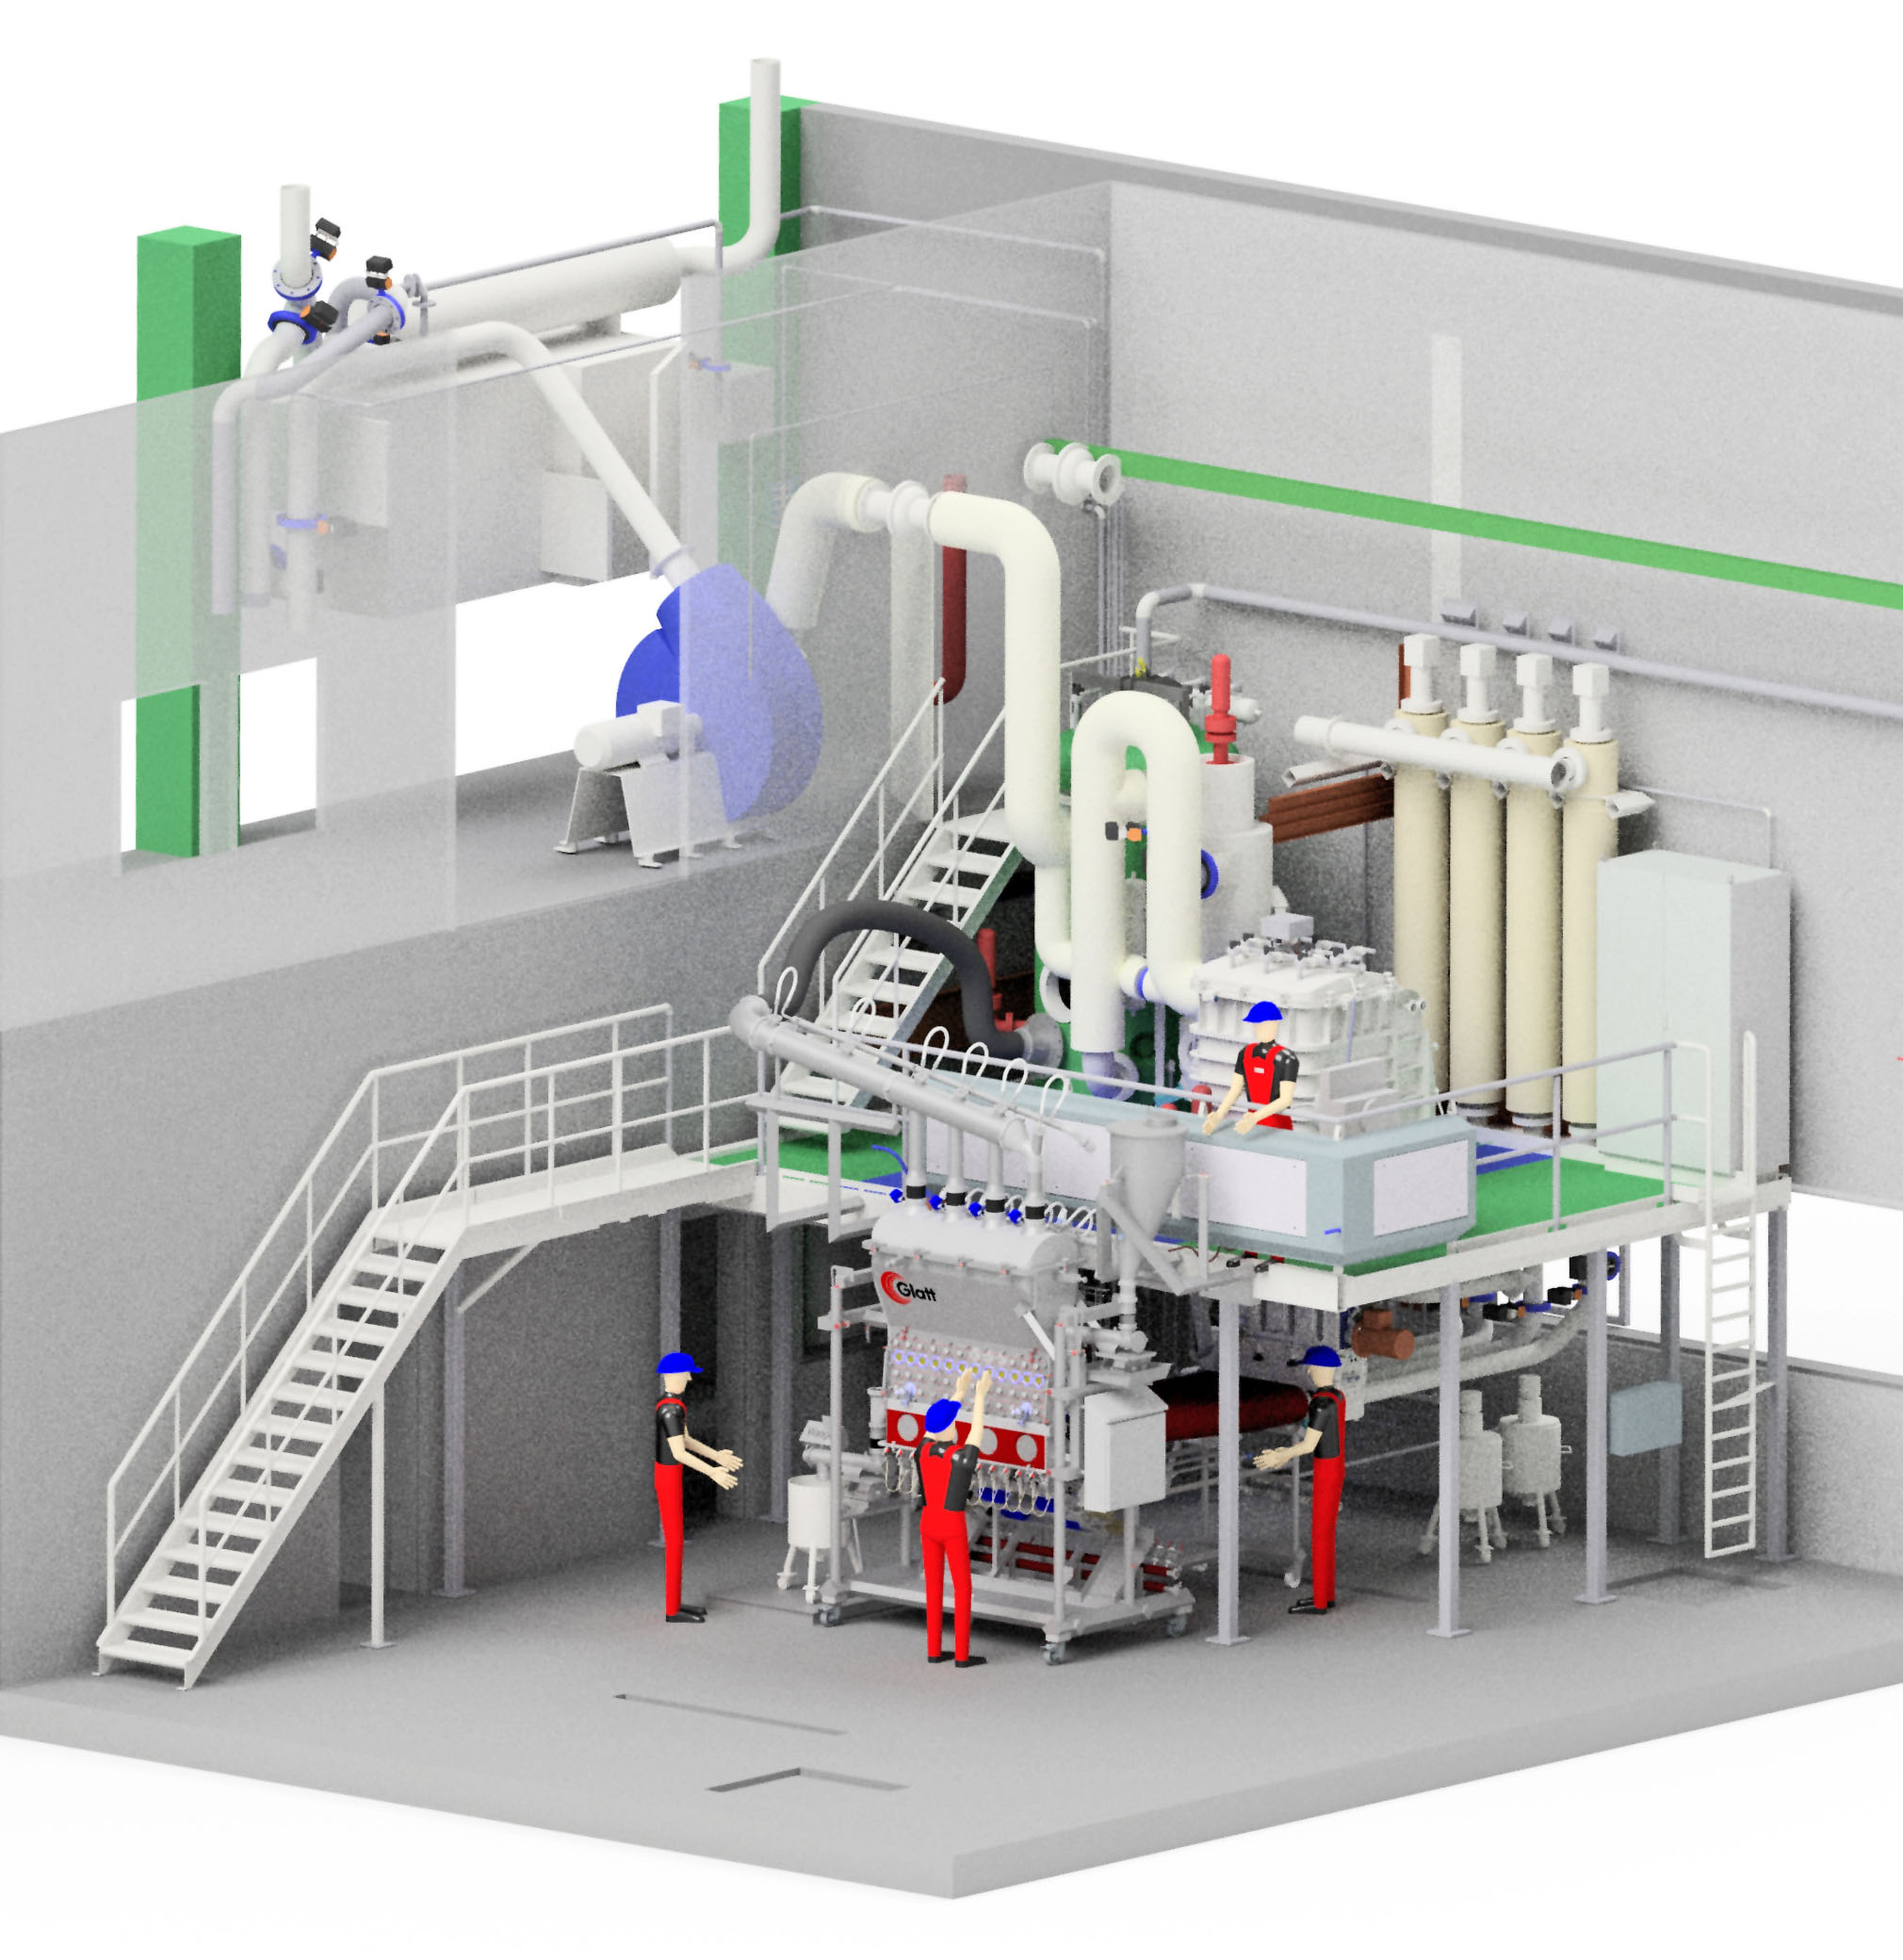 New fluidized bed coater module for all continuous coating and layering processes in the fluidized bed